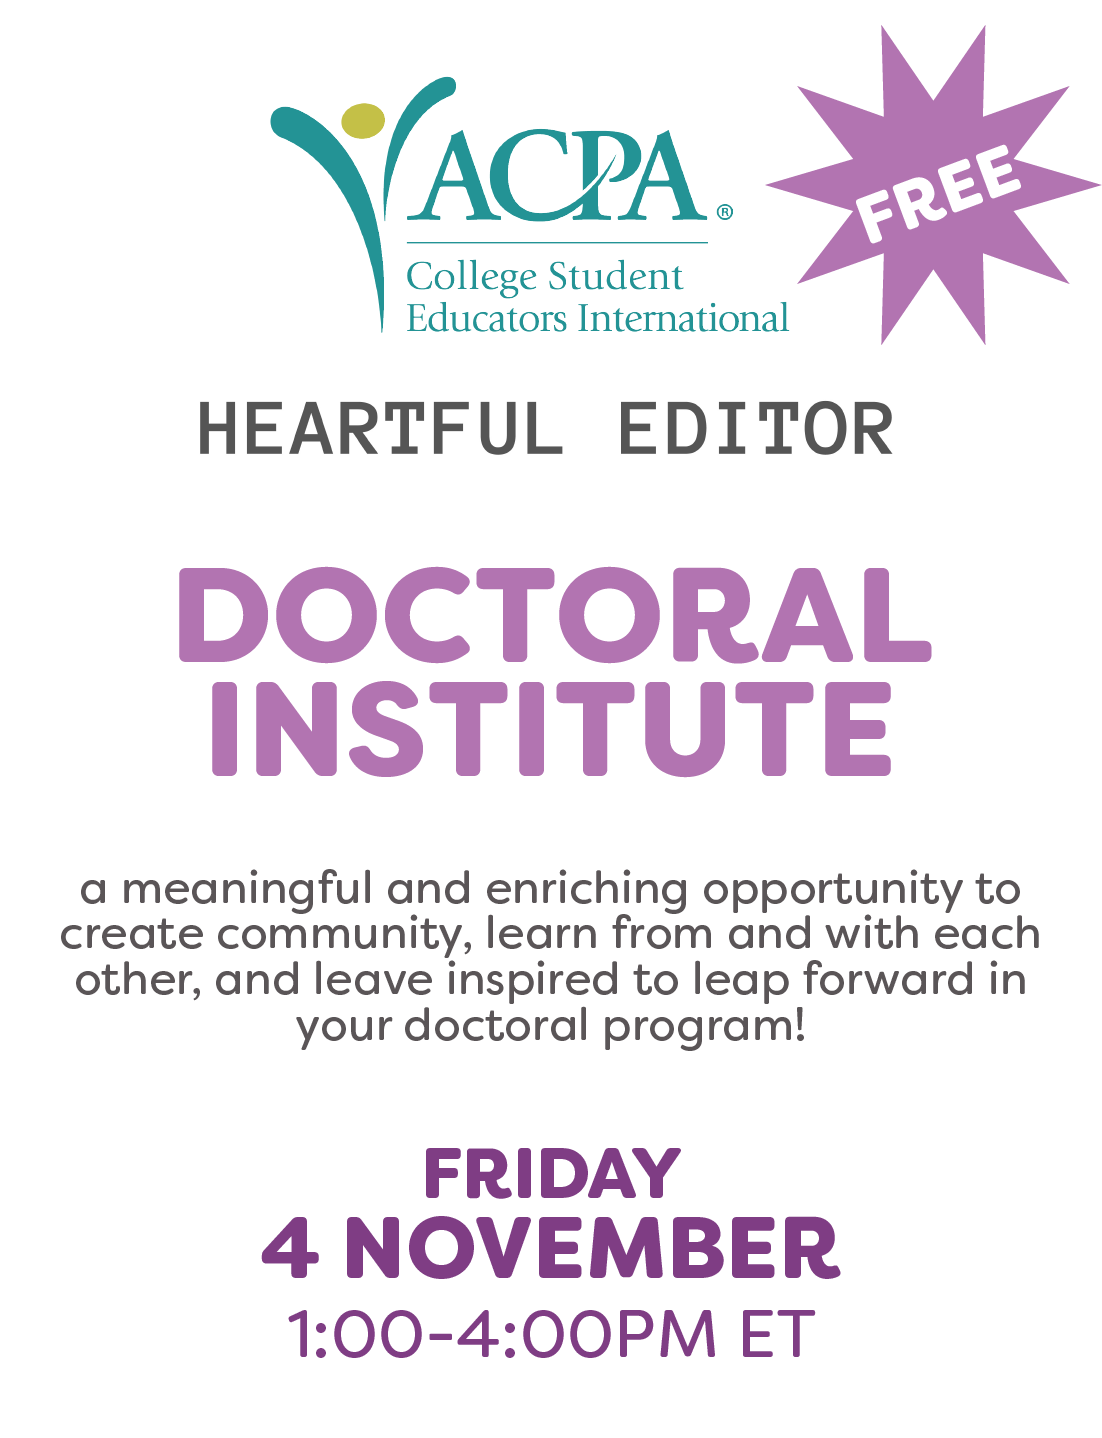 a meaningful and enriching opportunity to create community, learn from and with each other, and leave inspired to leap forward in your doctoral program! FRIDAY 4 NOVEMBER 1:00-4:00PM ET